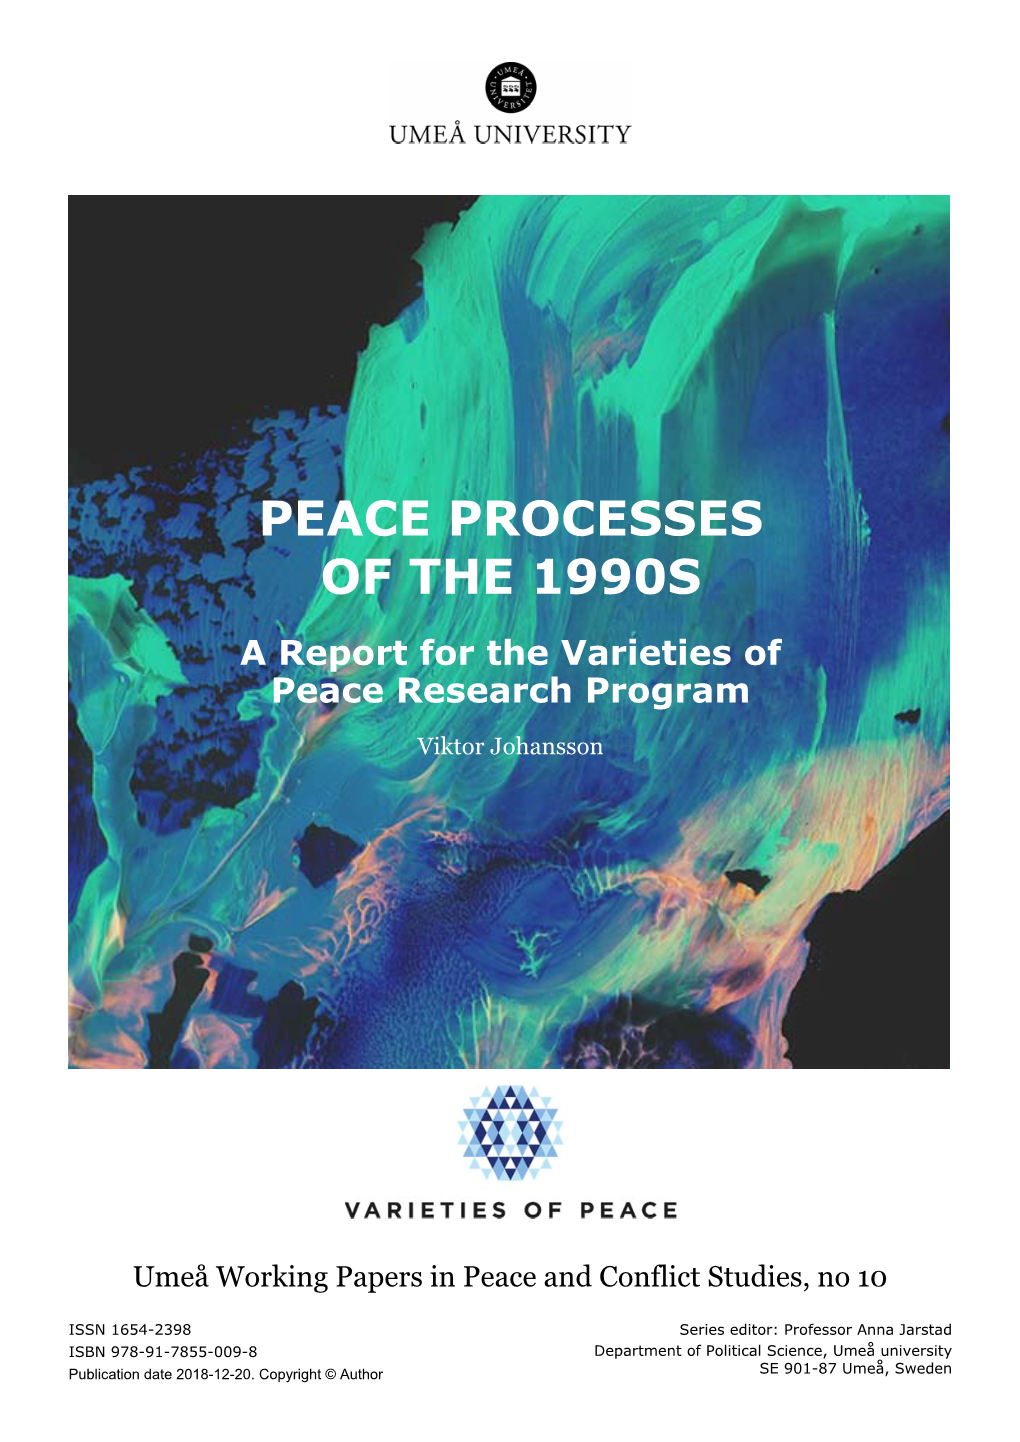 PEACE PROCESSES of the 1990S a Report for the Varieties of Peace Research Program